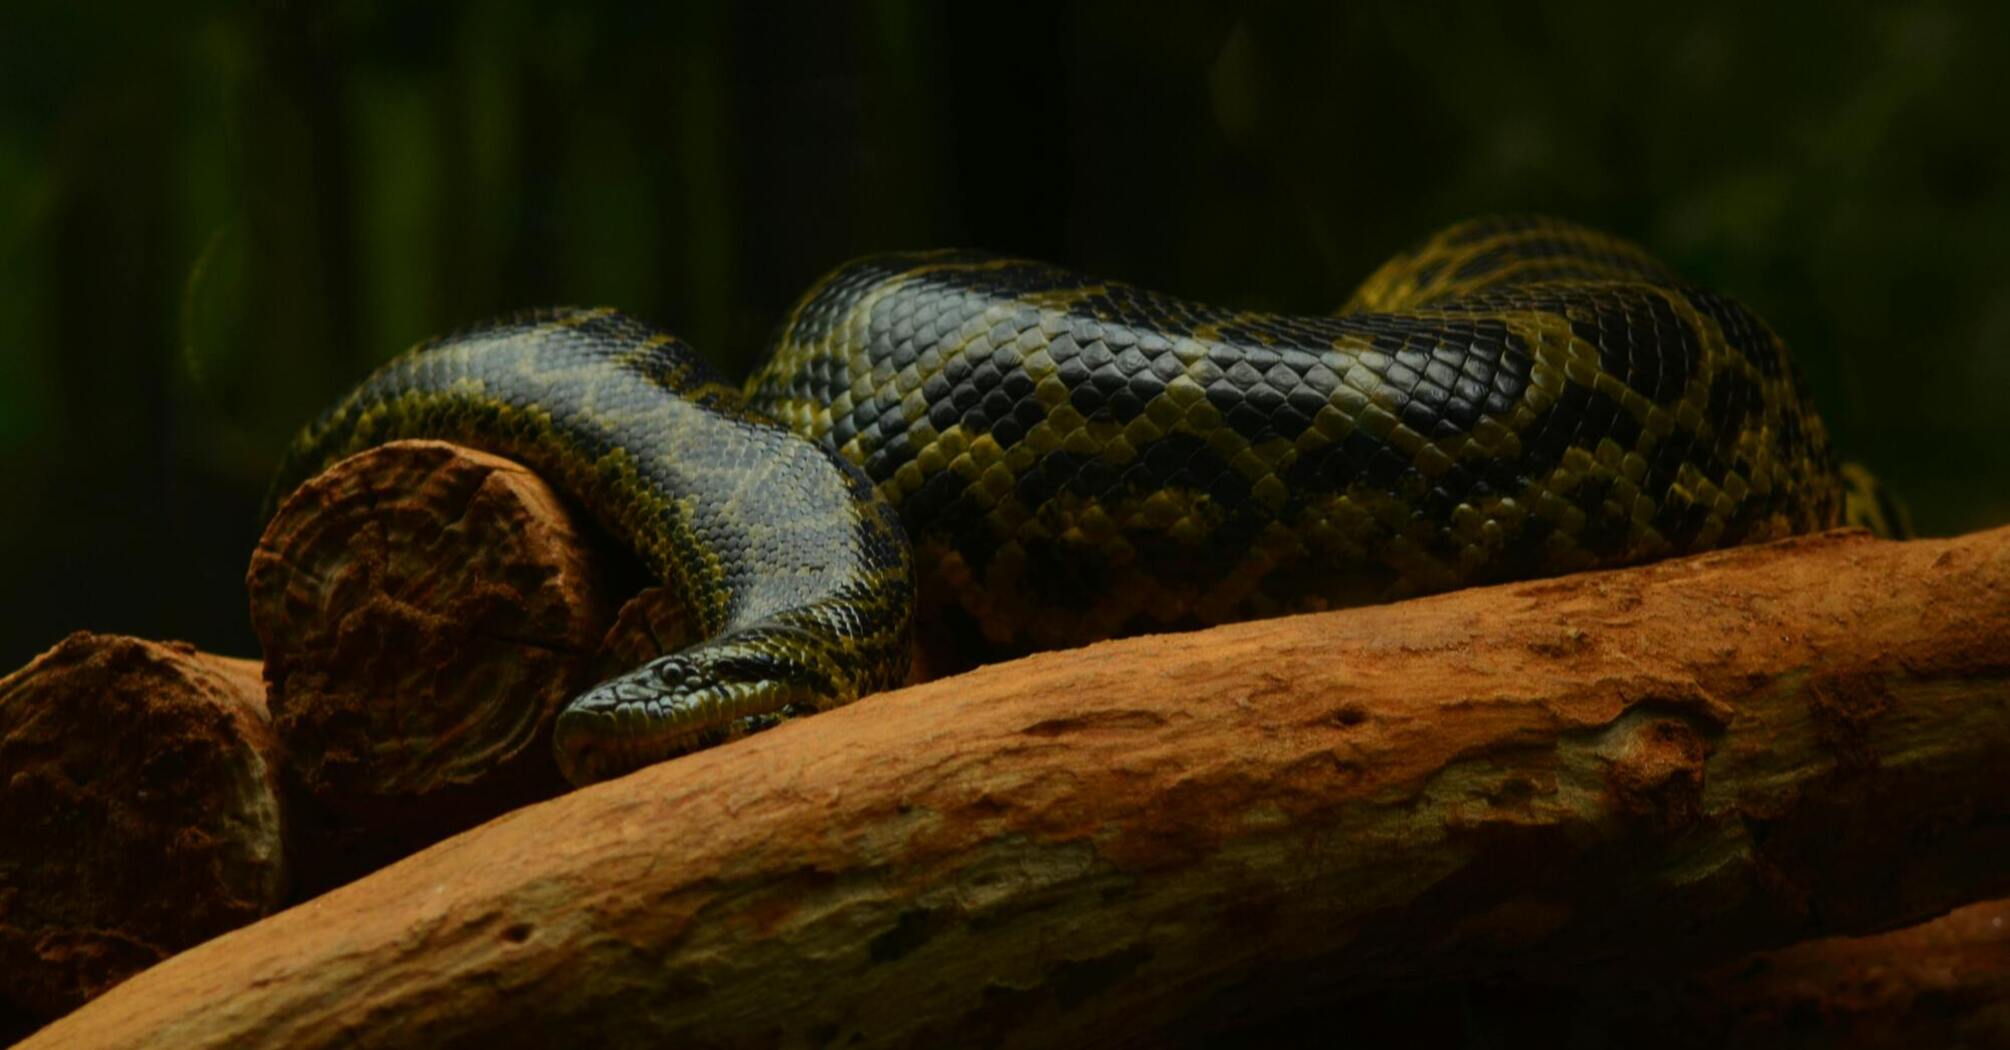 In the Amazon jungle, a new species of giant snake has been found